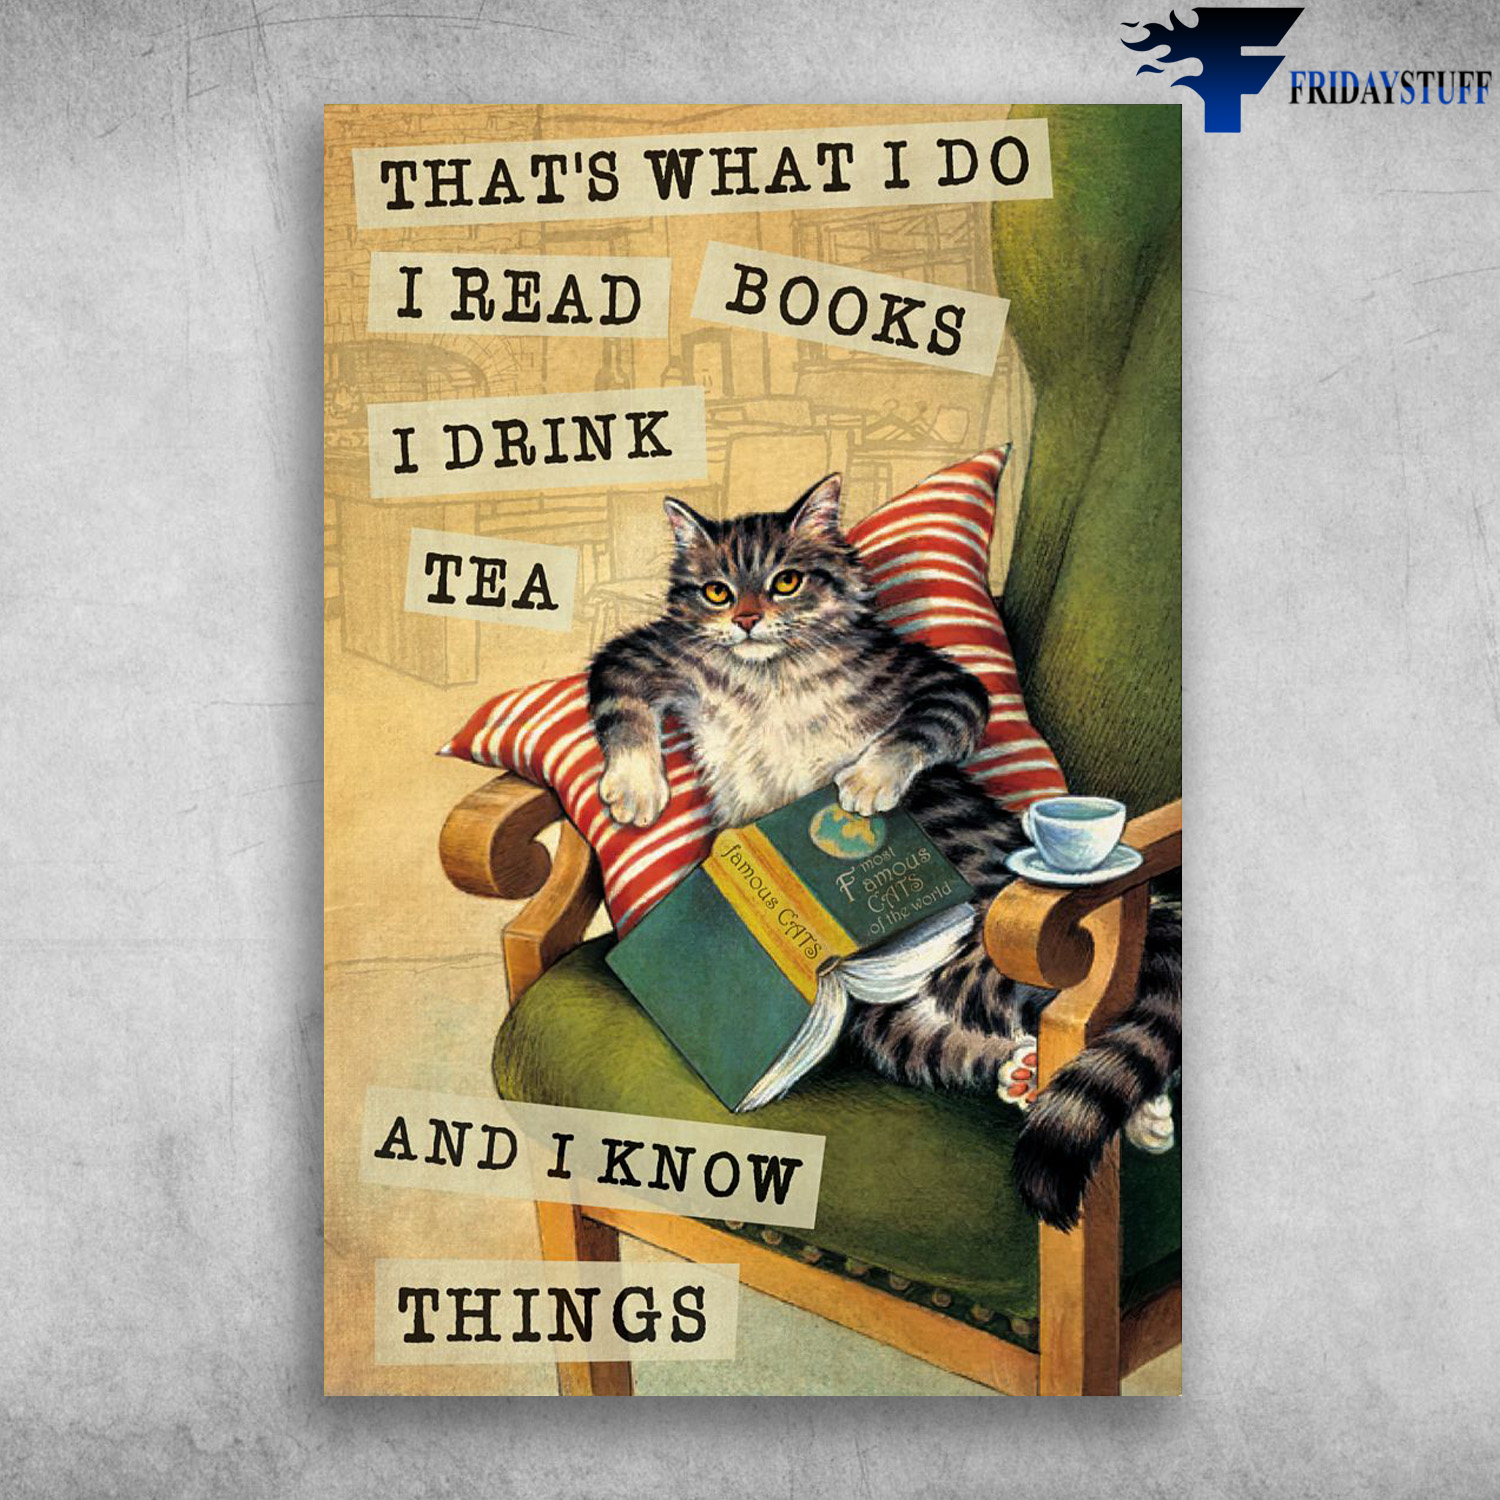 The Cat Reads Book And Drinks Tea - That's What I Do, I Read Books, I Drink Tea, And I Know Things